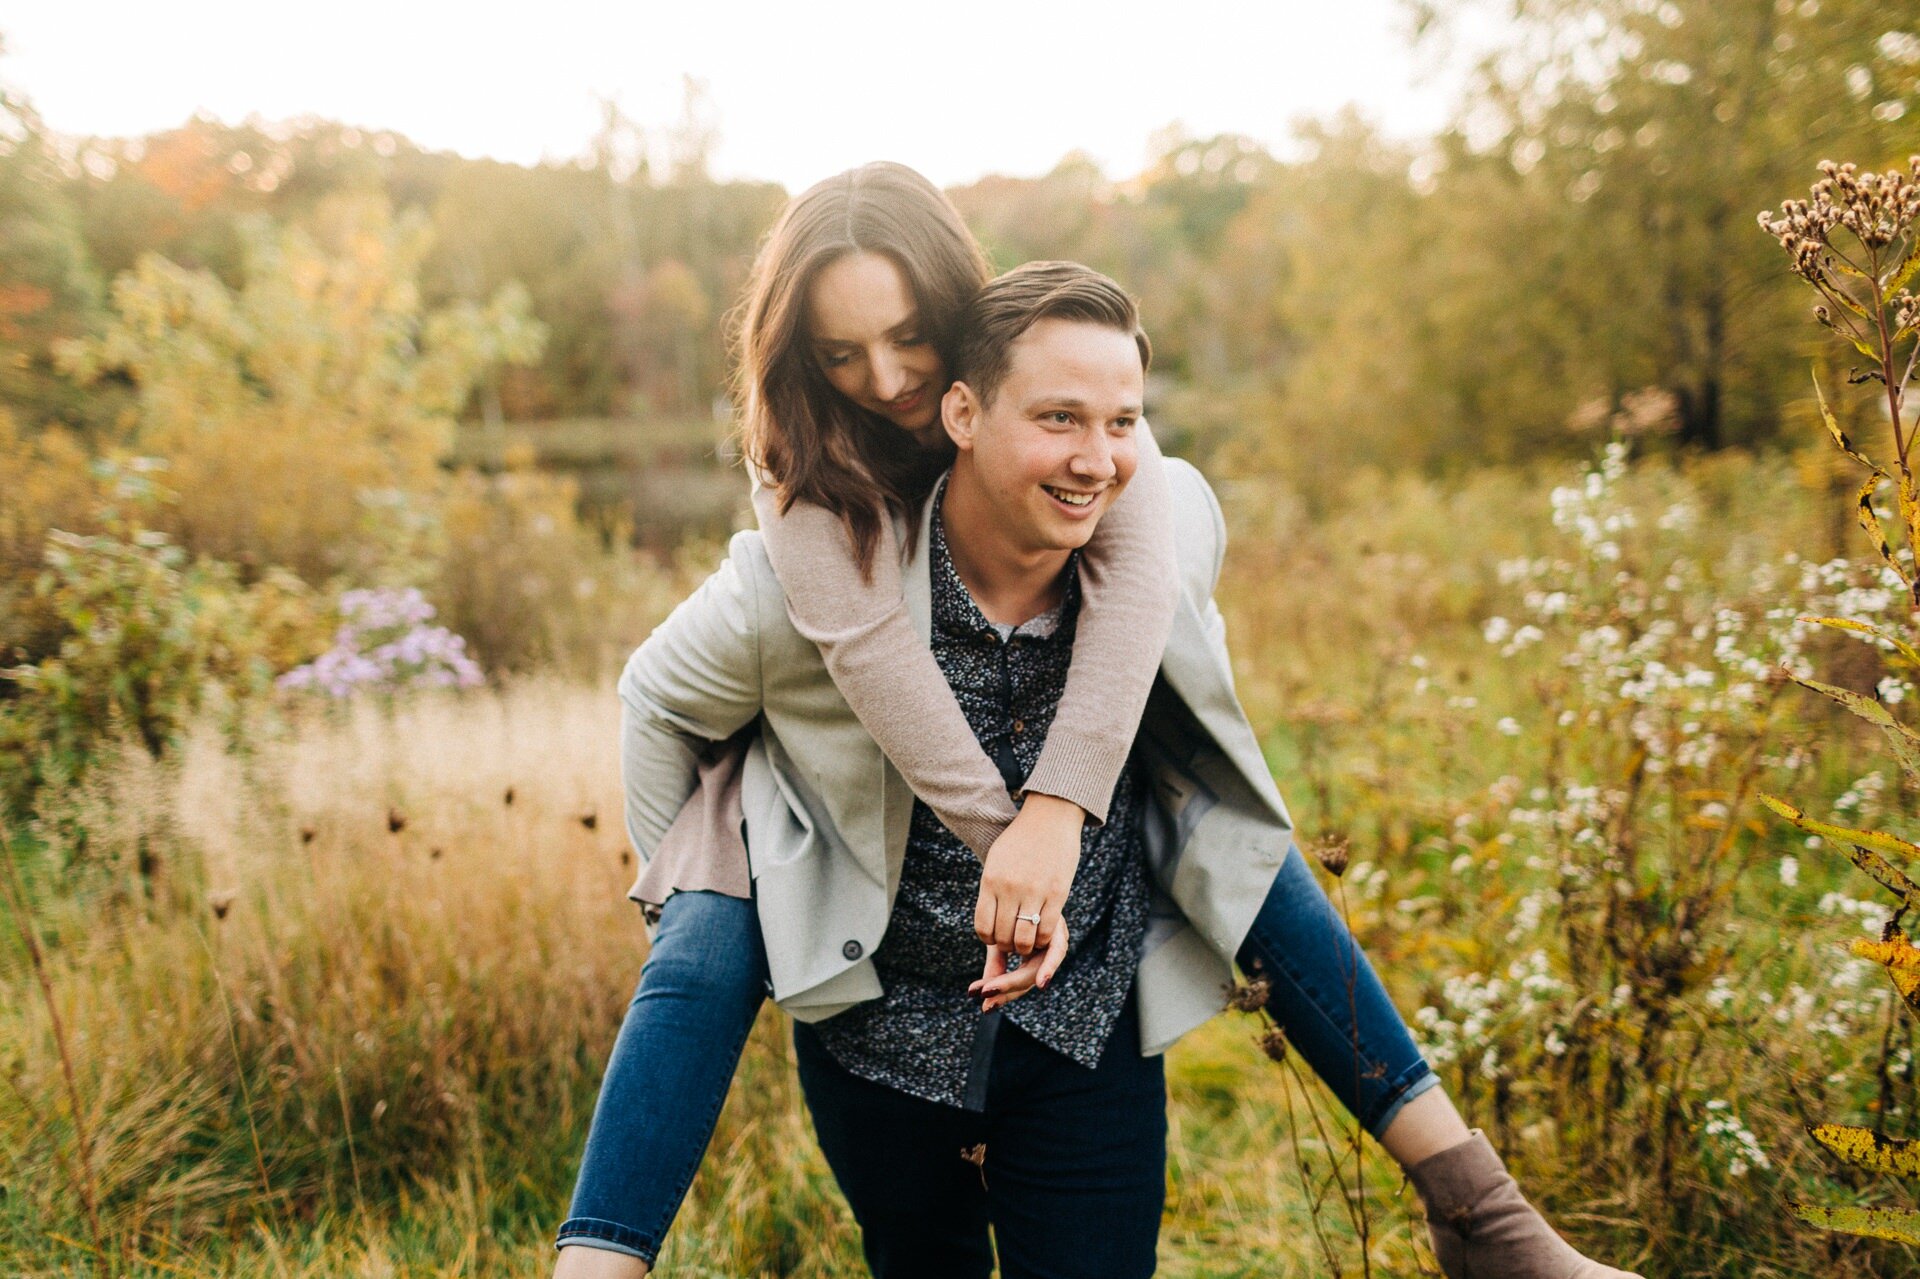 Cleveland Fall Engagement Photos at Patterson Fall Festival 18.jpg